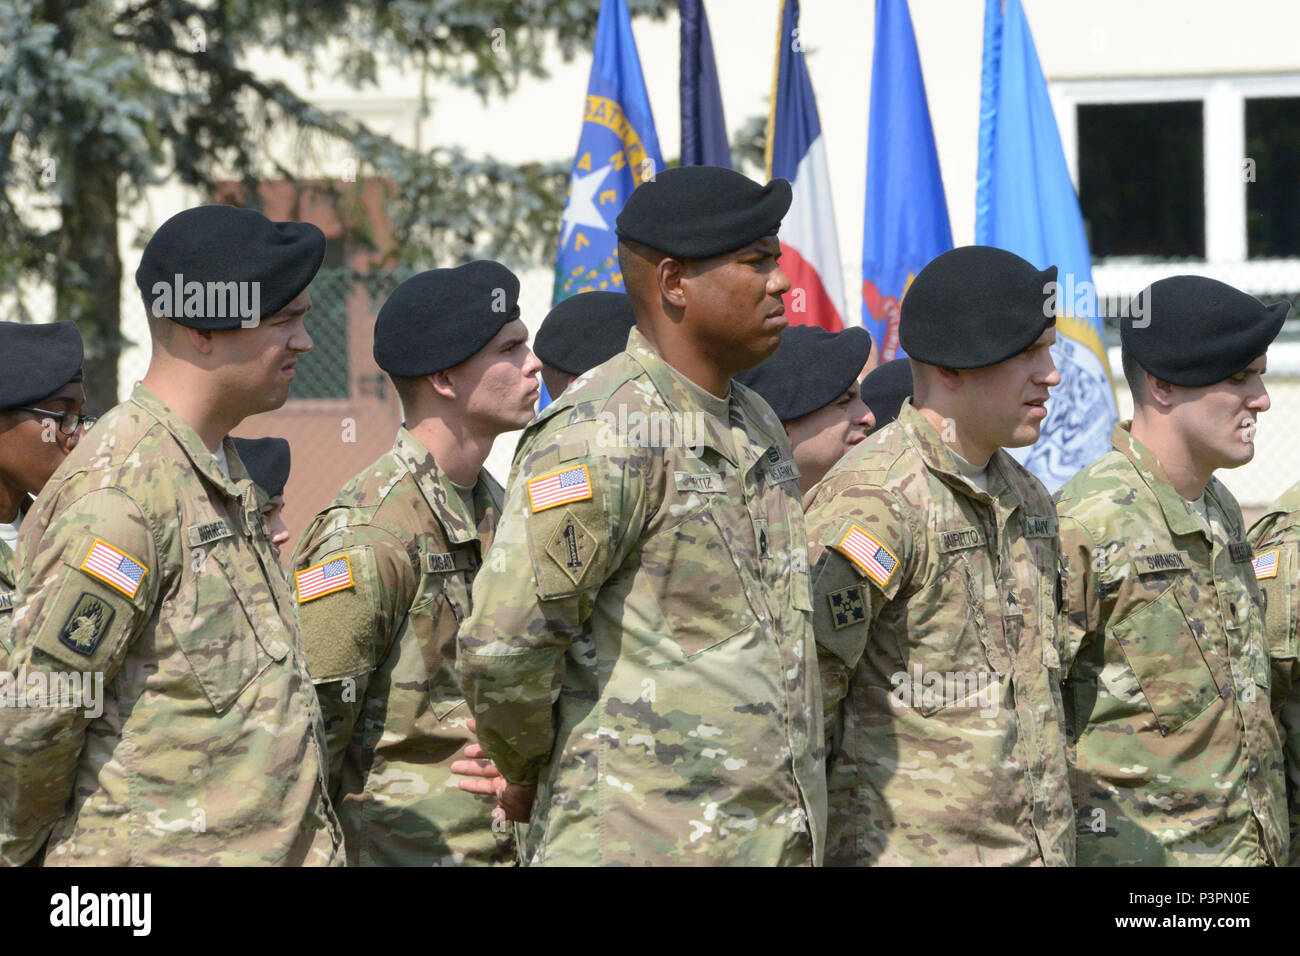 ANSBACH, Germany (July 21, 2016) – Soldiers stand at parade rest during the U.S. Army Garrison Ansbach change of command ceremony Monday at Barton Barracks here. Col. Christopher M. Benson relinquished garrison command, and Col. Benjamin C. Jones assumed command. Stock Photo